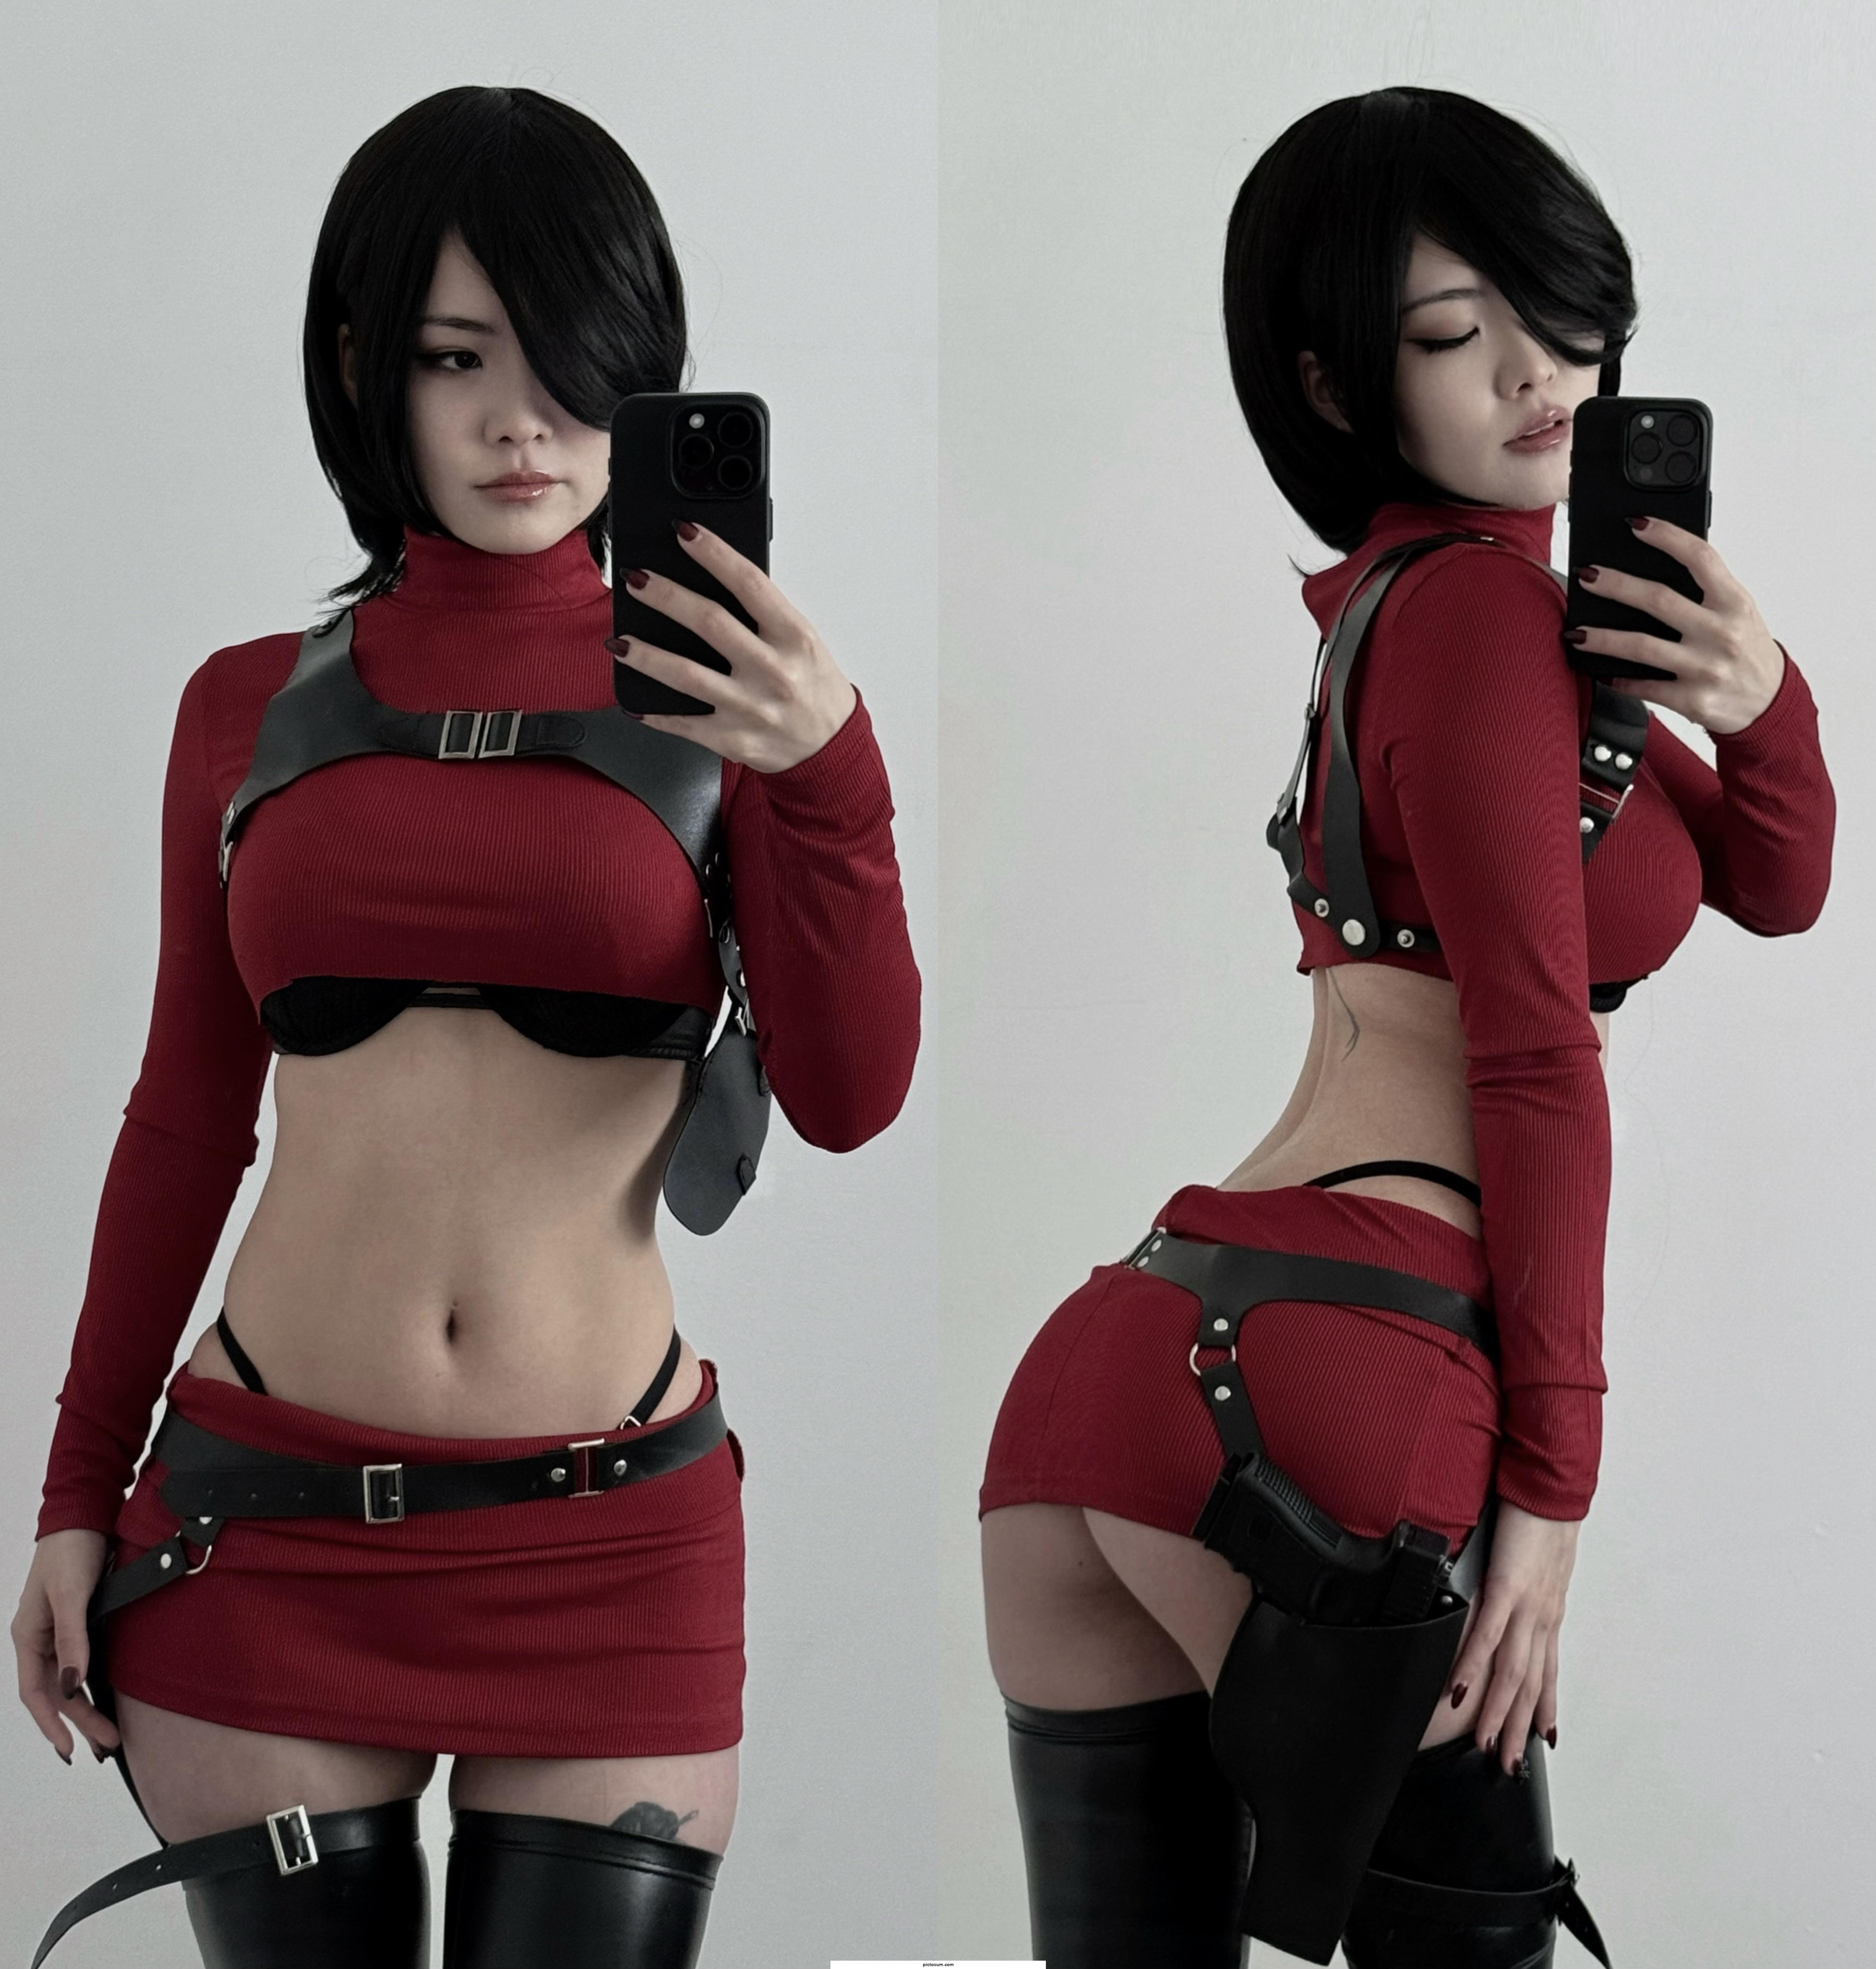 Ada Wong re4 remake by me 🖤